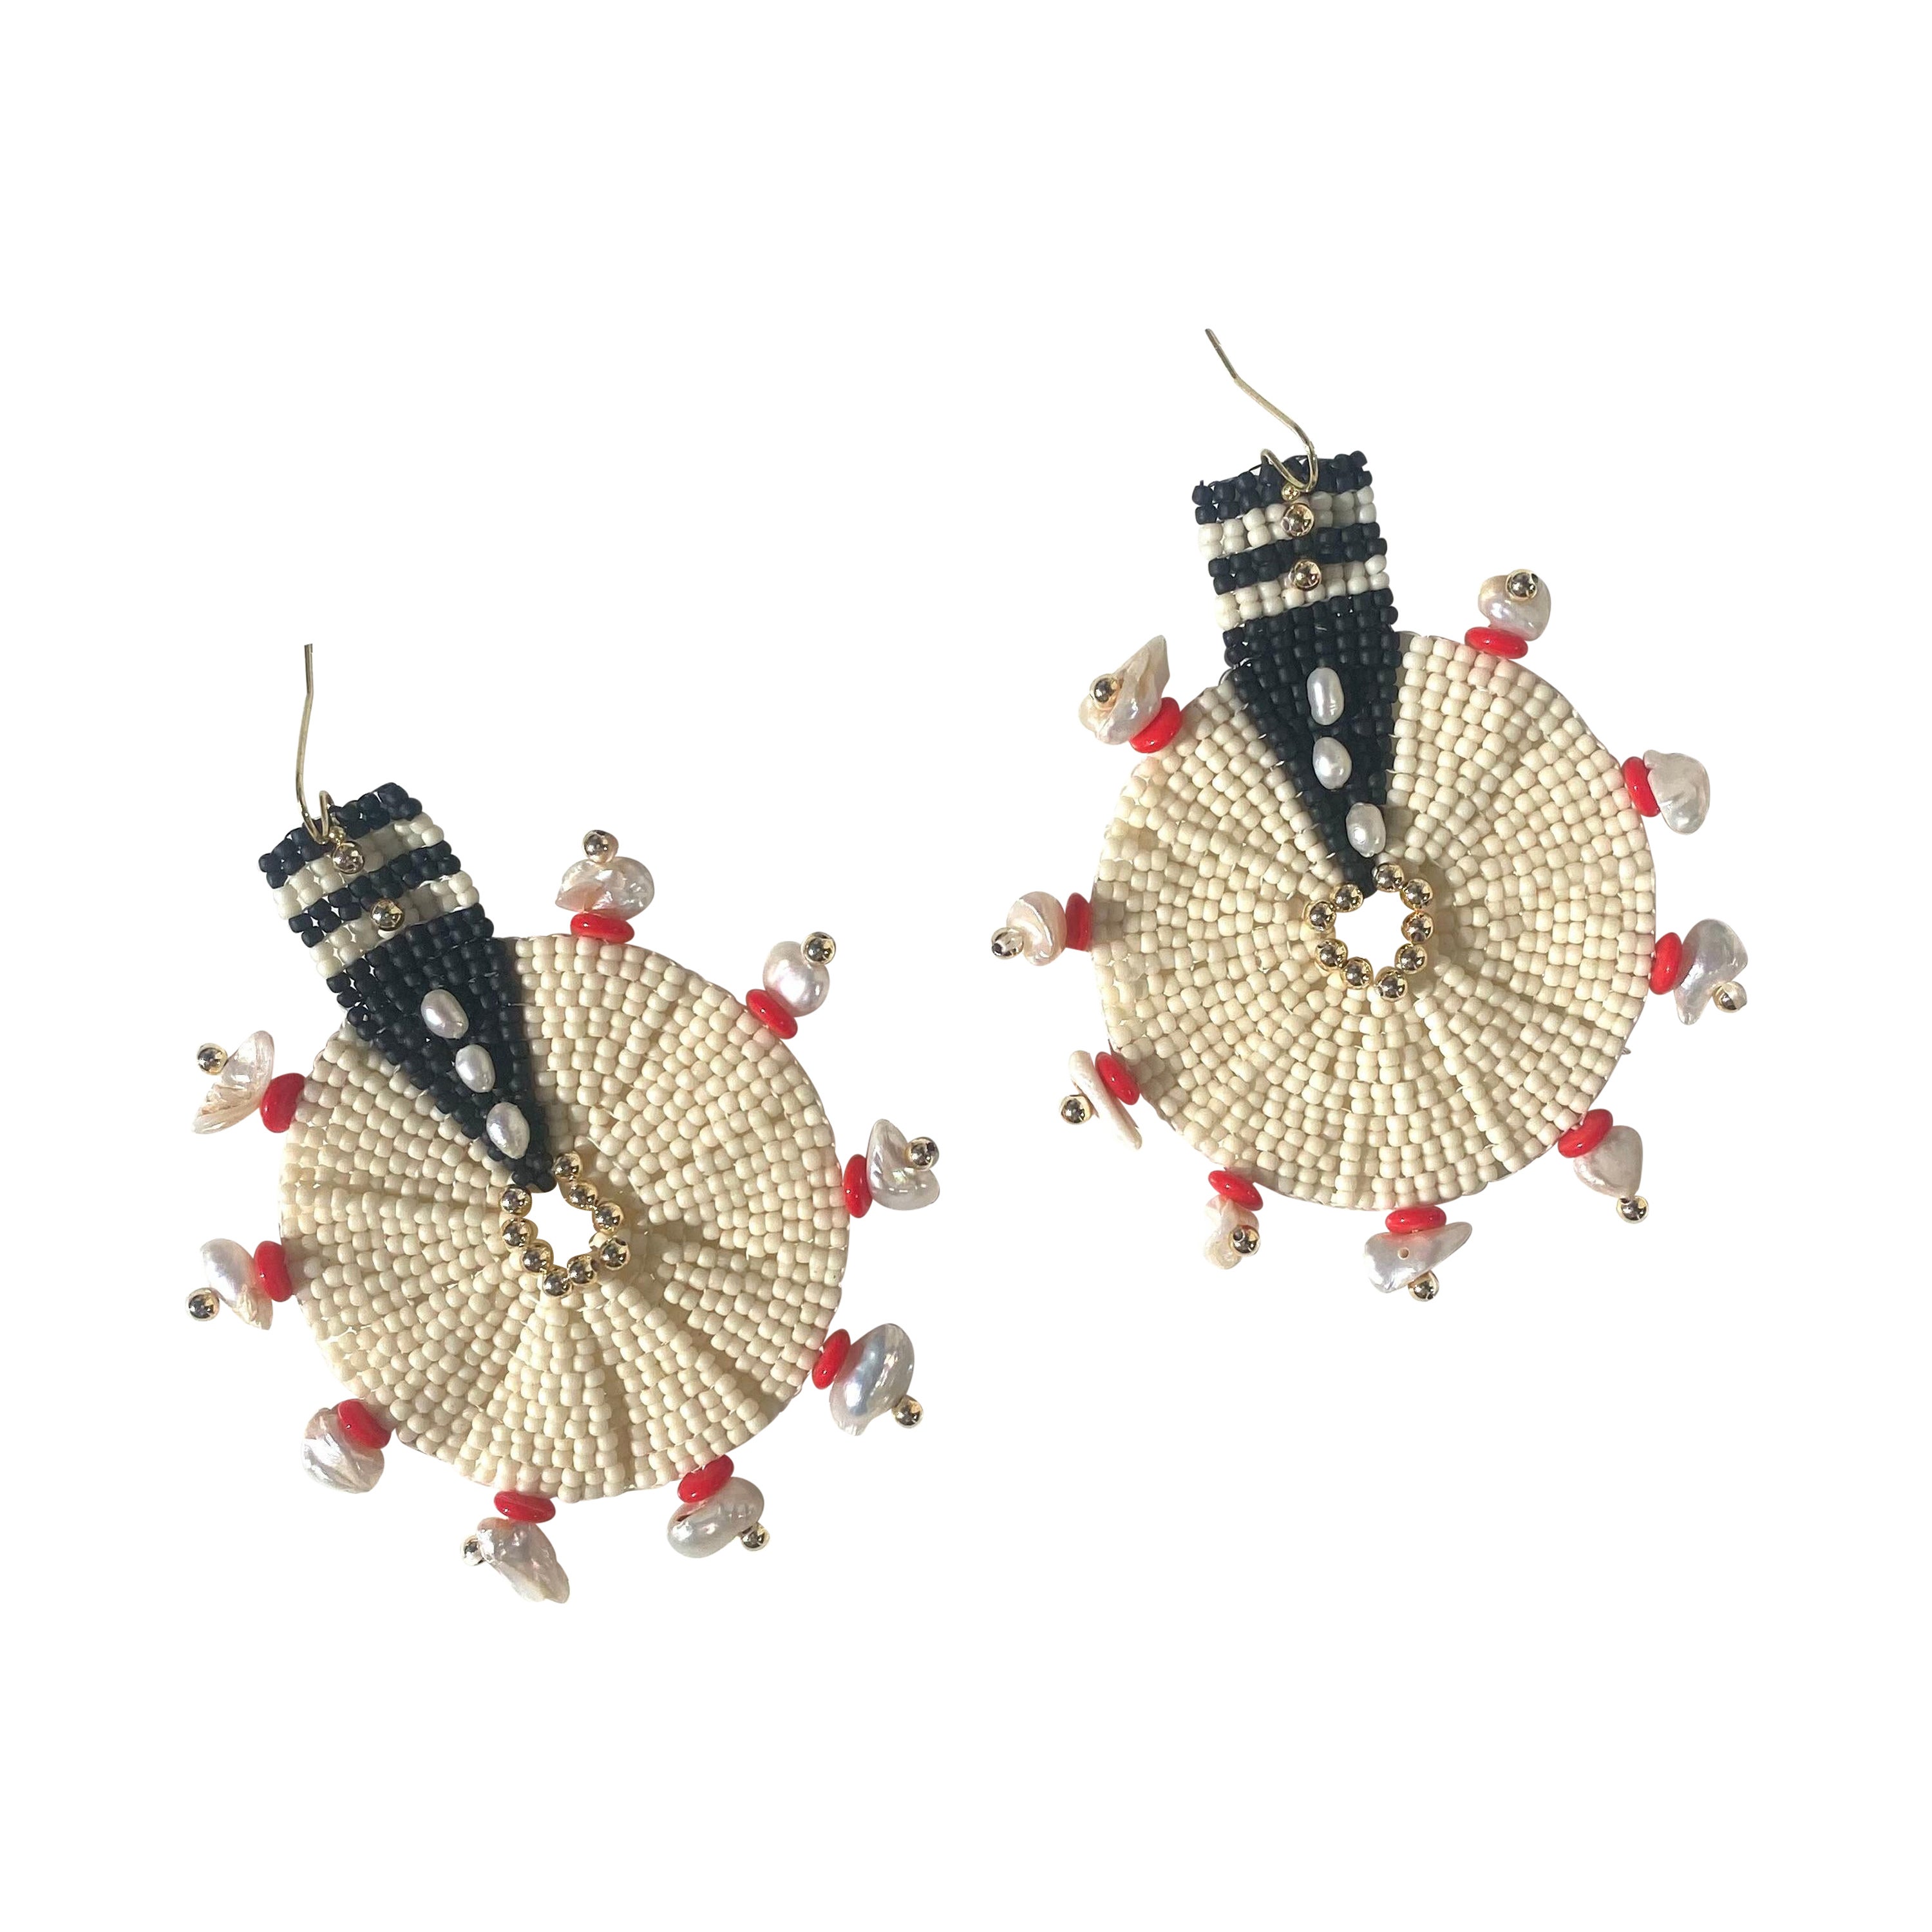 Handwoven Japanese ivory/black seed Bead Fatima Earring by Madre Hija Design

Handwoven Japanese ivory and black seed beads with 14k gold plated beads and freshwater pearl nuggets. Gold filled ear wire.

Madre Hija Design is a contemporary handwoven